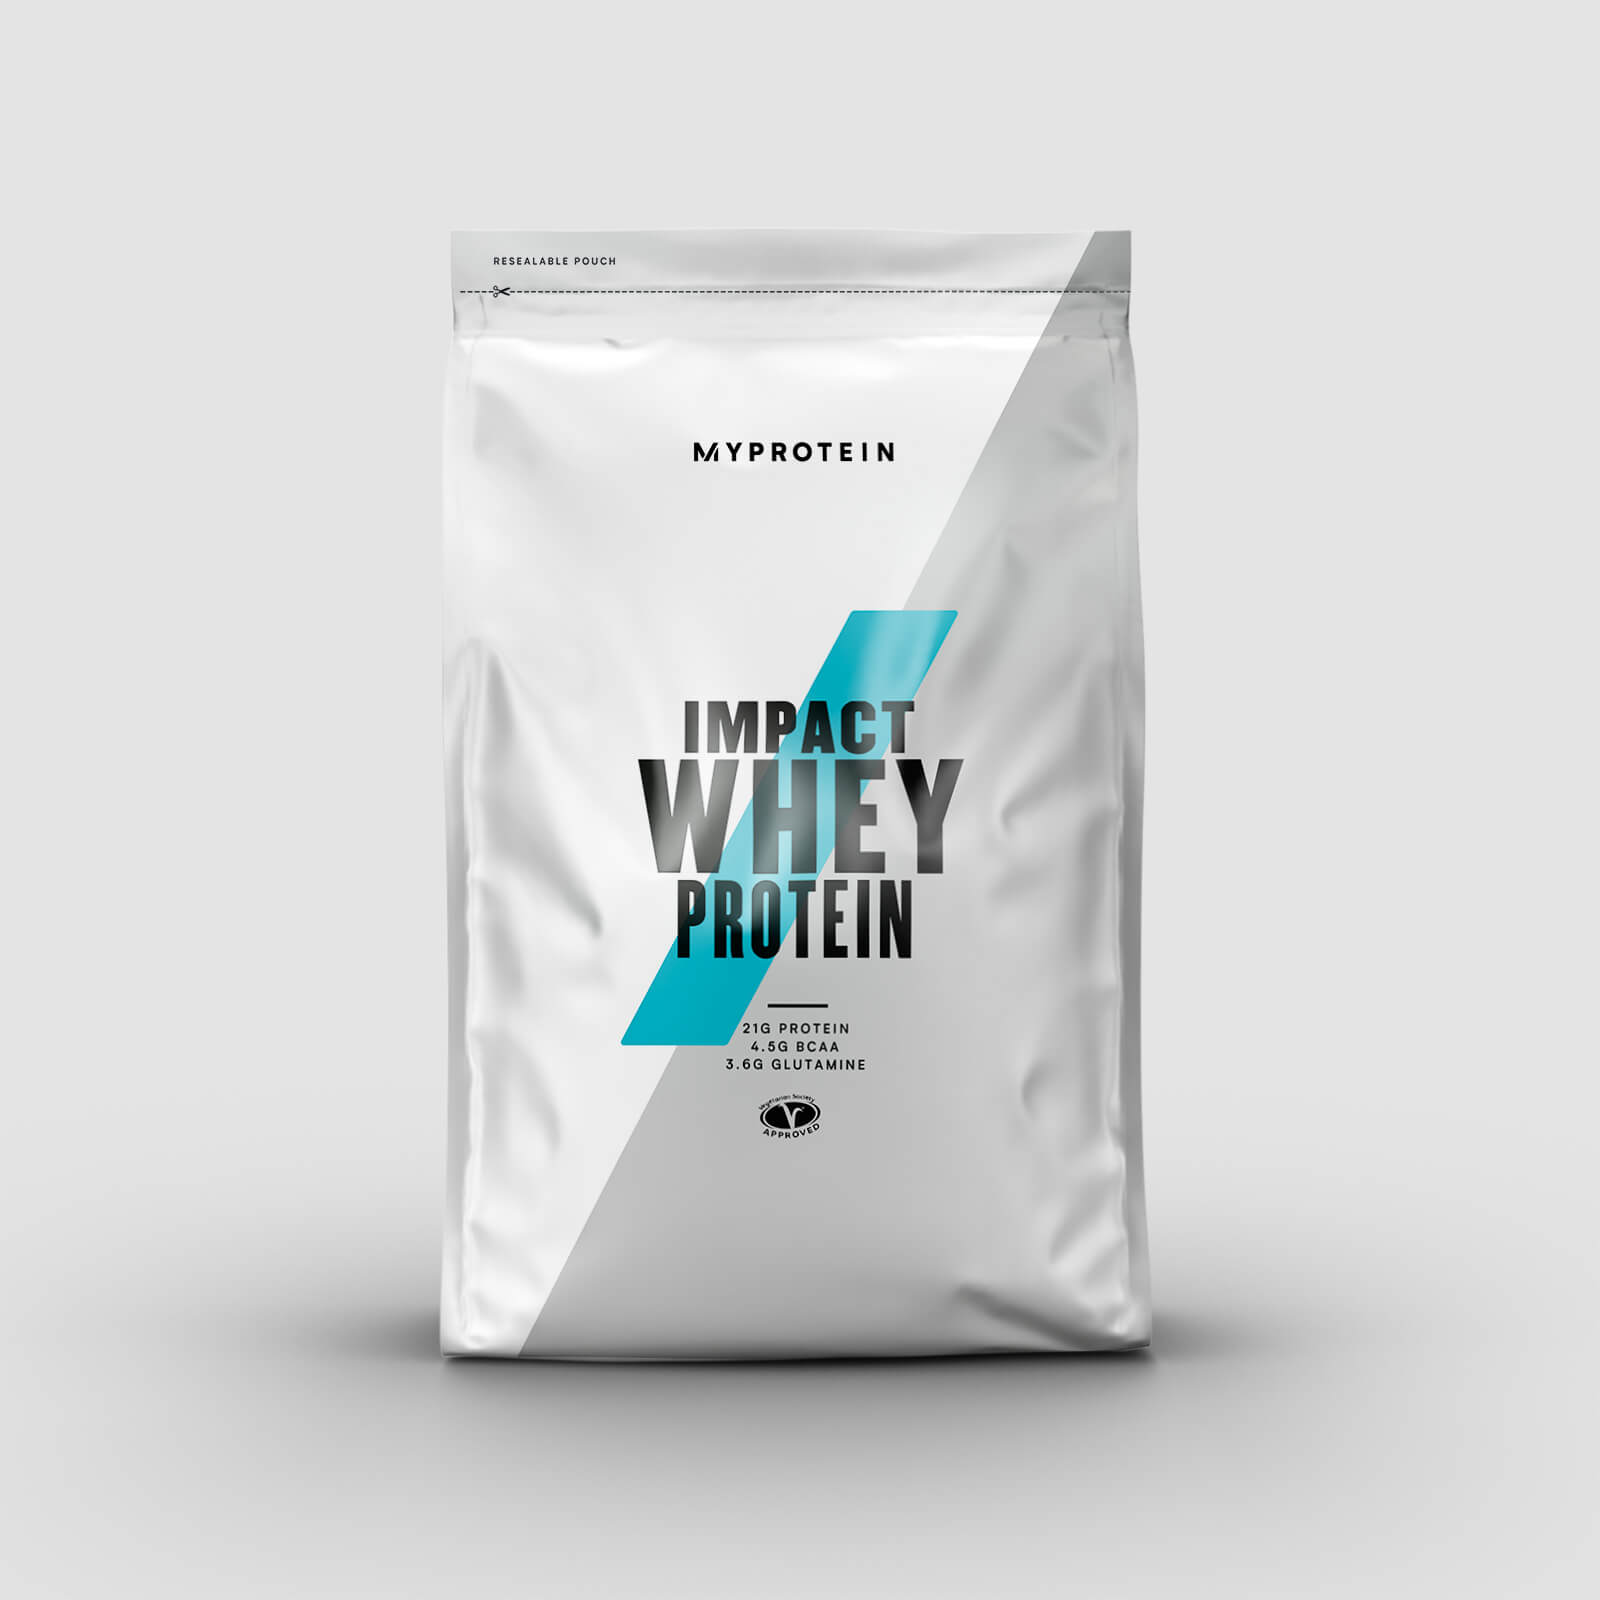 Myprotein Impact Whey Protein - 250g - Rocky Road - New and Improved